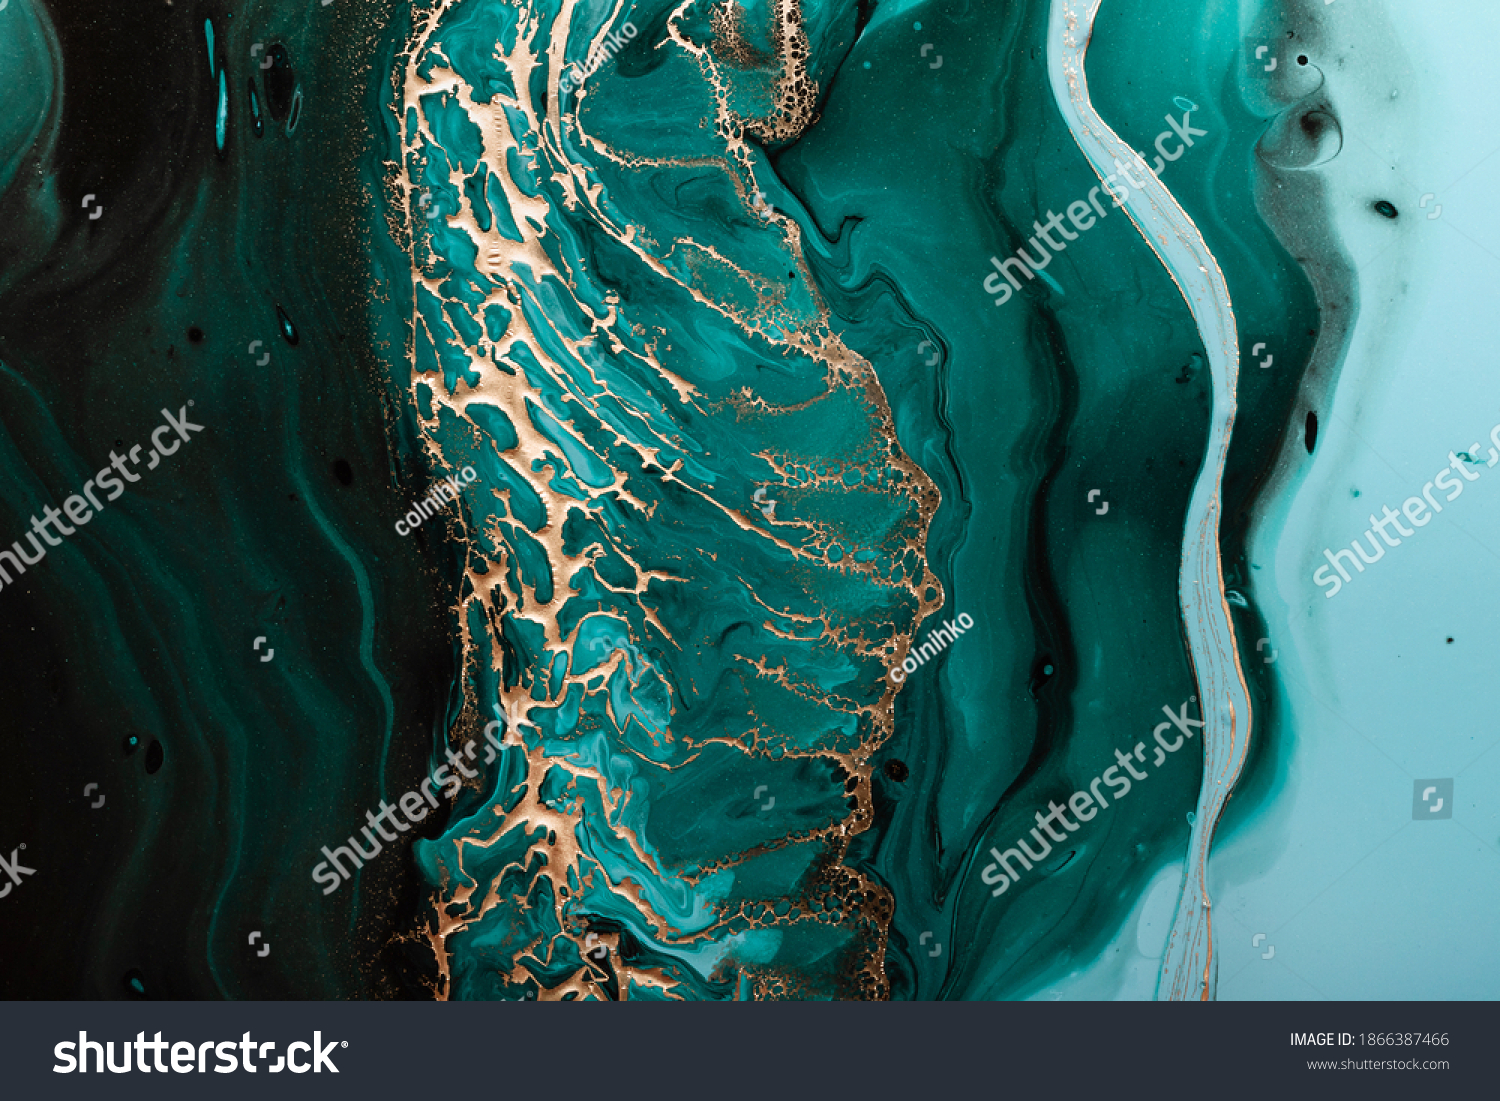 Acrylic Fluid Art. Dark green waves in abstract ocean and golden foamy waves. Marble effect background or texture. #1866387466